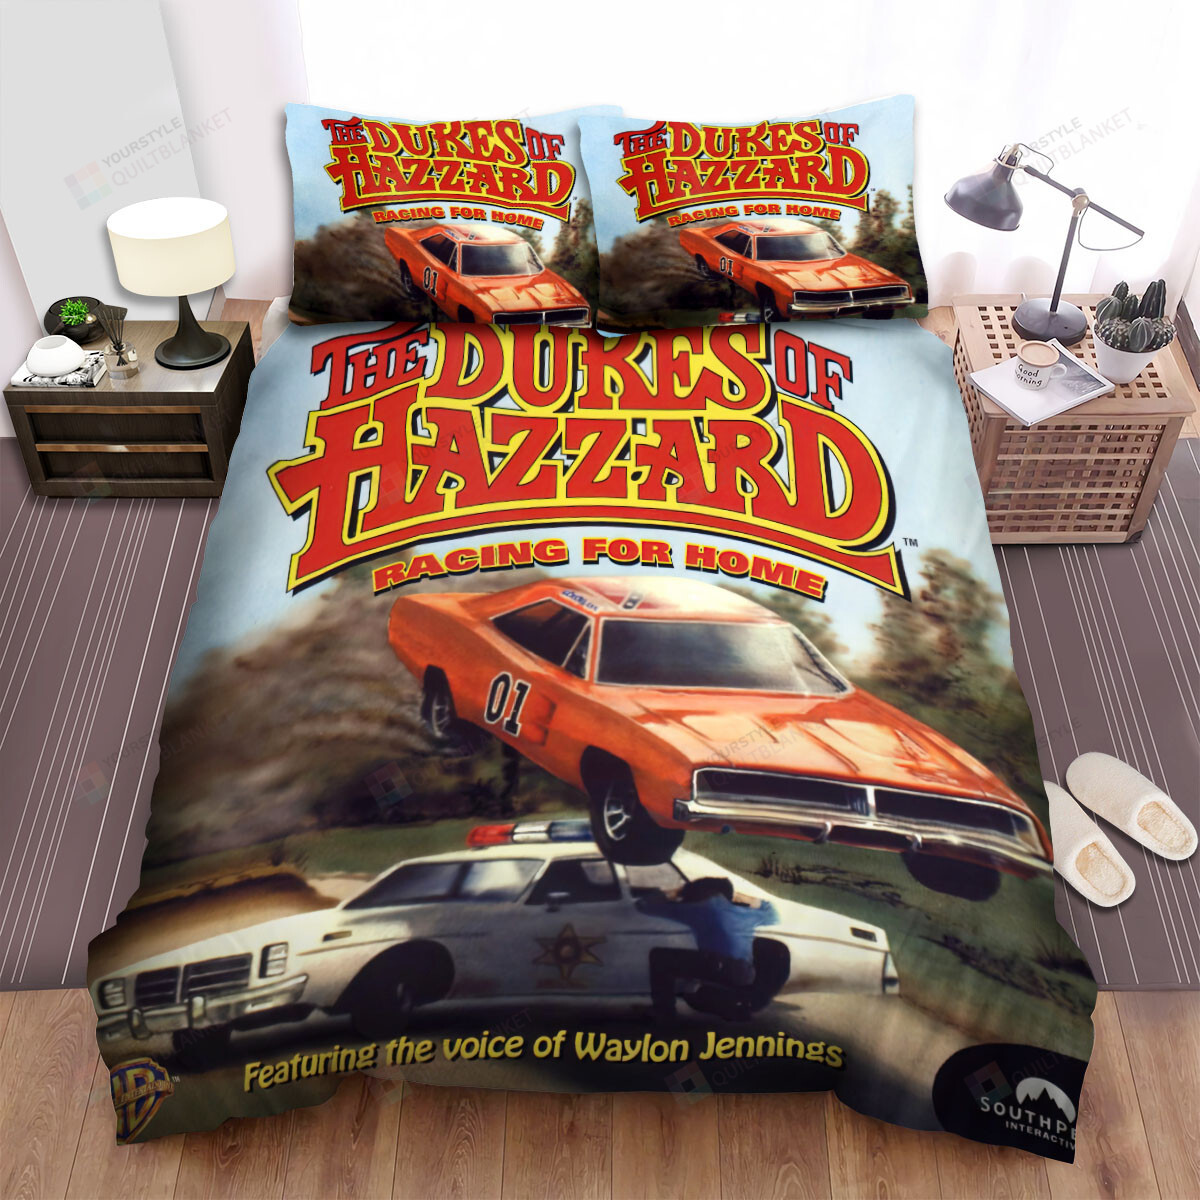 The Dukes Of Hazzard (1979â€“1985) Racing For Home Movie Poster Bed Sheets Spread Comforter Duvet Cover Bedding Sets Zanaboutique